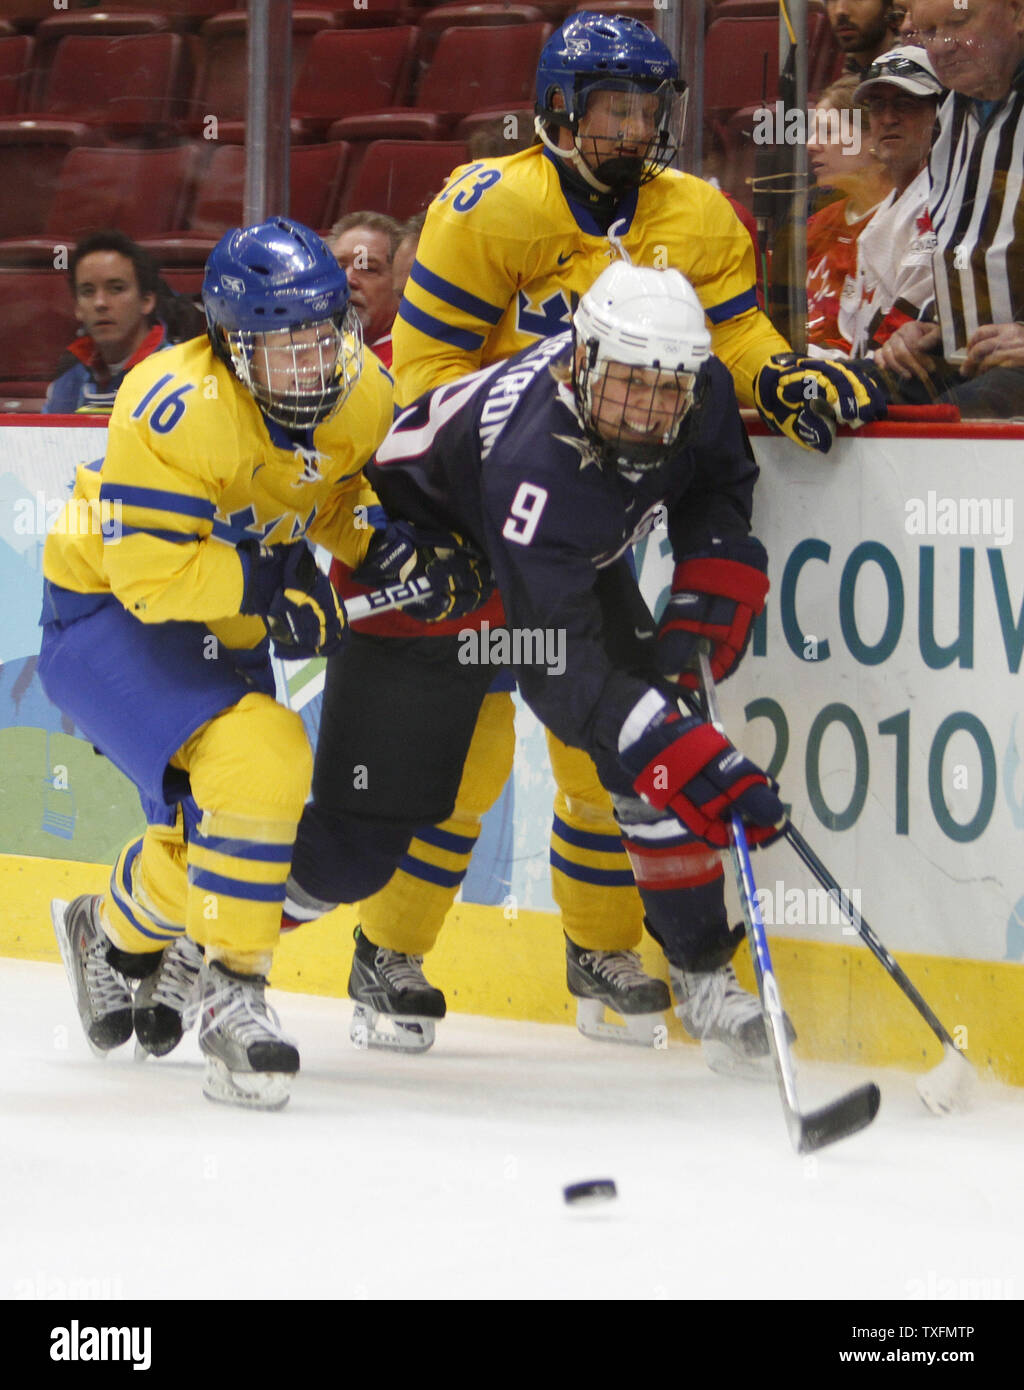 Molly Engstrom (9) skates with the puck as Pernilla Winberg (L) and Gunilla Andersson of Sweden defend during the second period of an ice hockey game at the 2010 Winter Olympics in Vancouver, Canada on February 22, 2010.     UPI/Brian Kersey Stock Photo